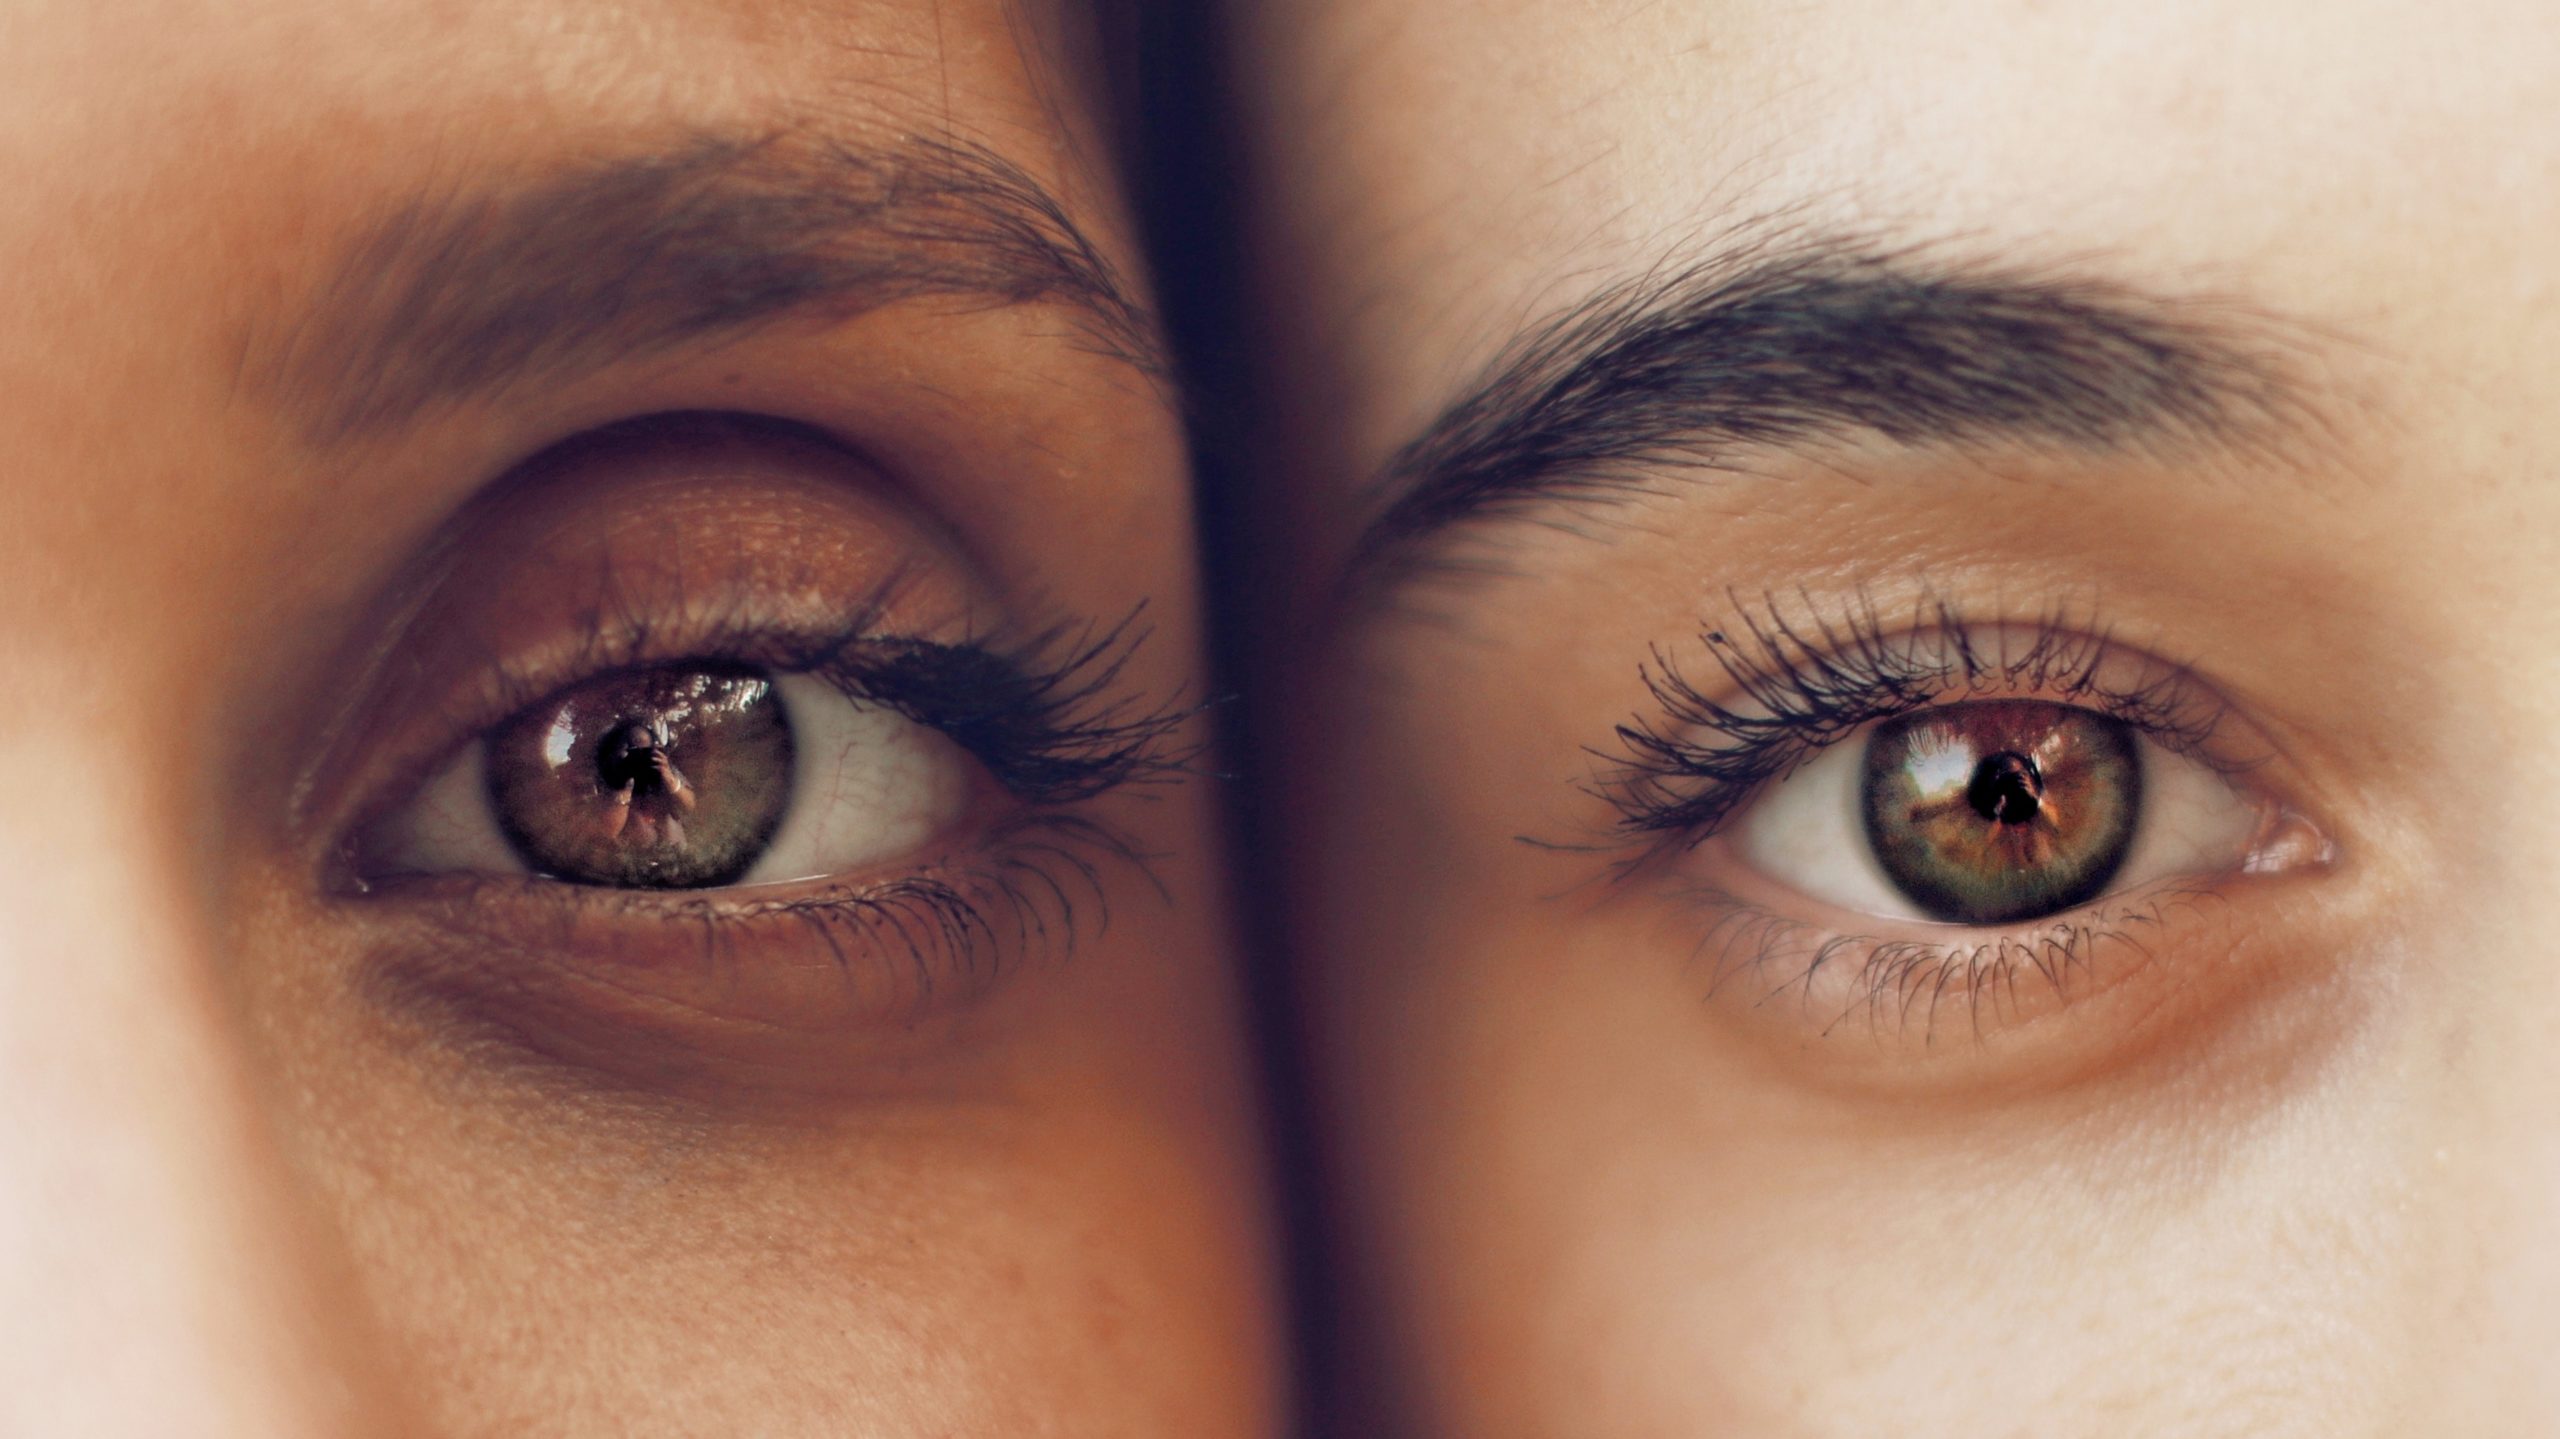 Two beautiful women and their beautiful eyes